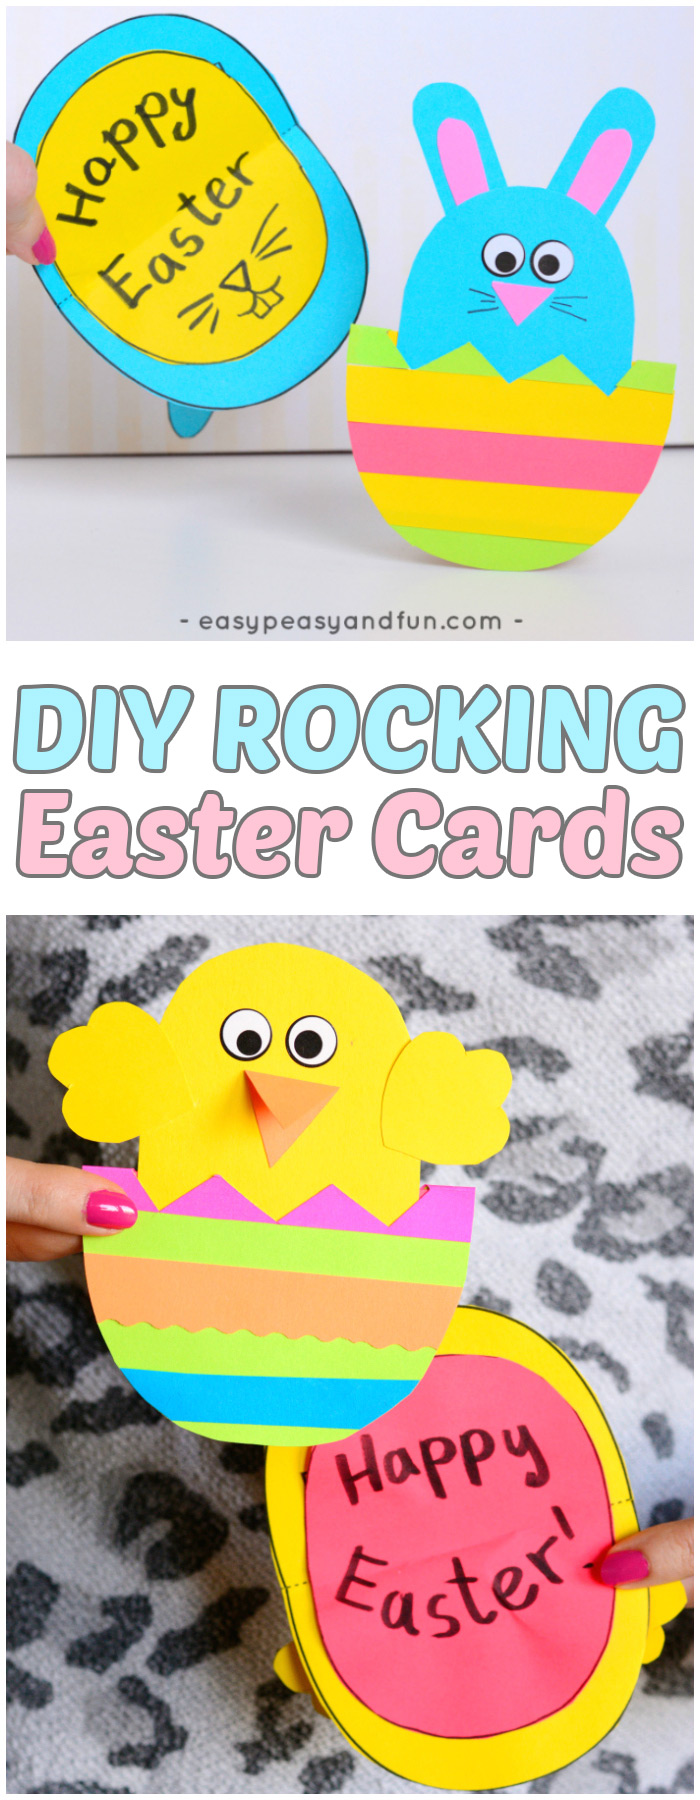 The most adorable DIY Easter cards - a chick and bunny that both rock and open up #colorize #ad